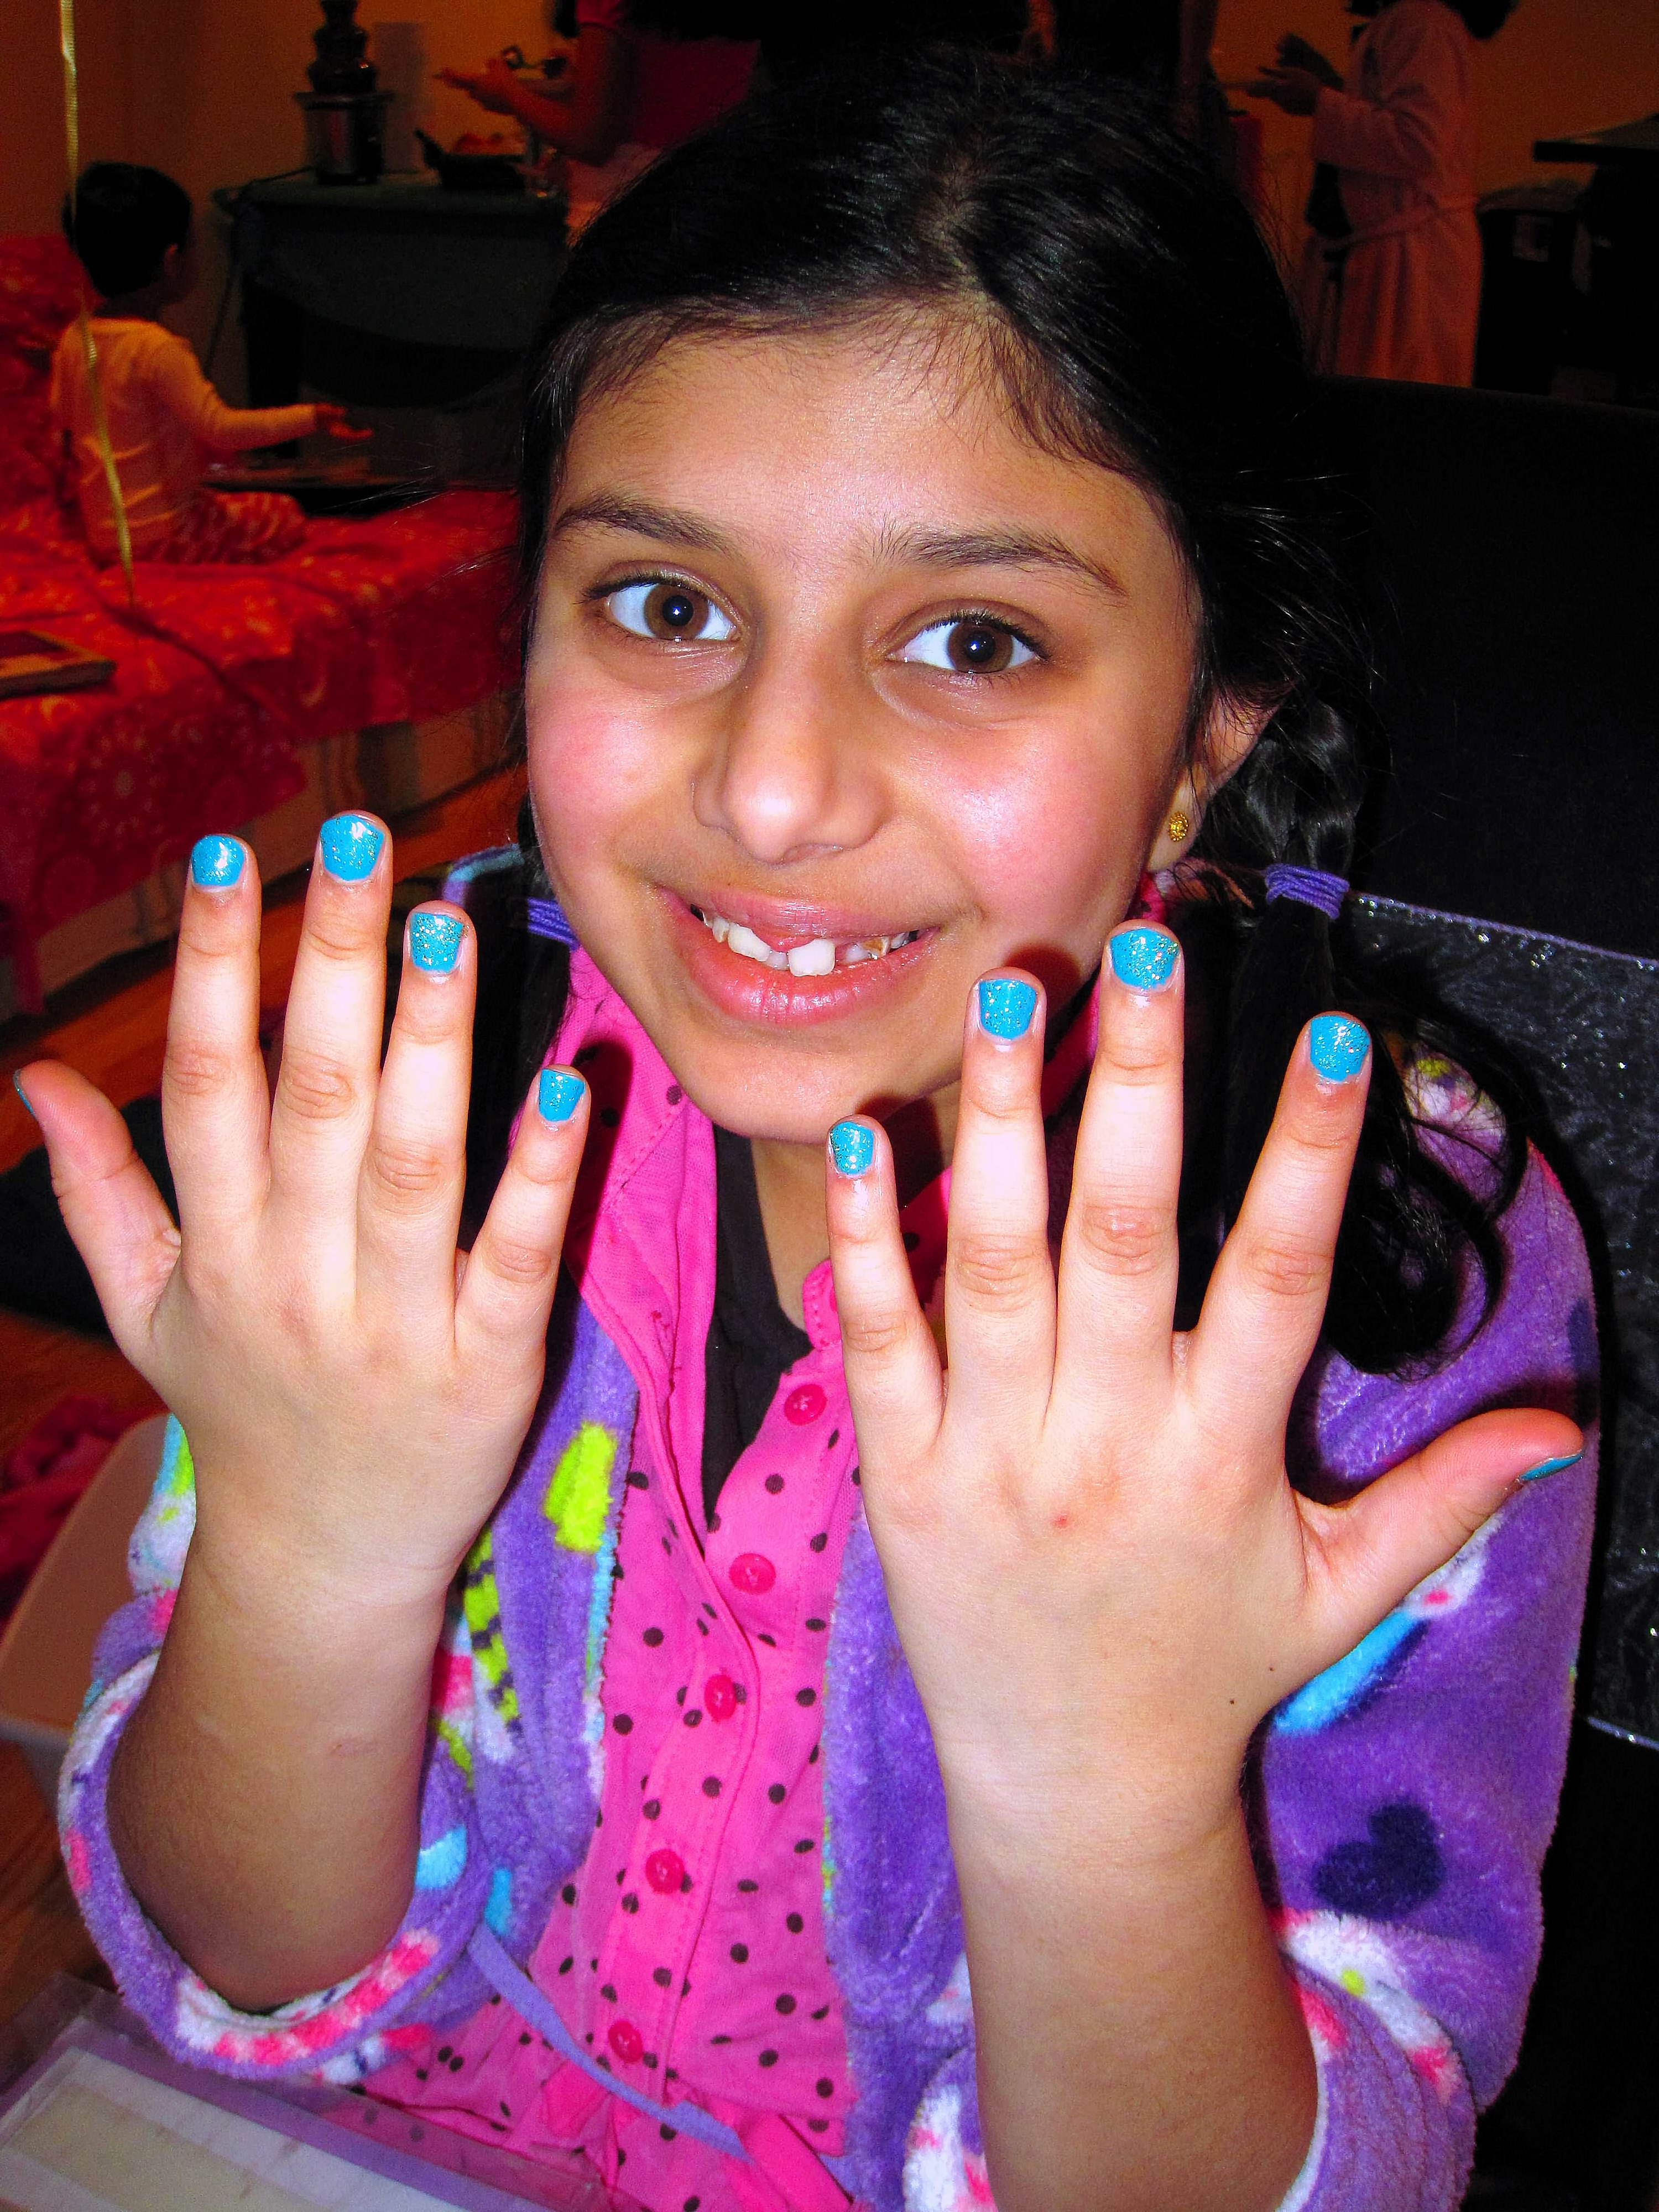 She's Loving Her Girls Home Spa Party Mini Manicure!